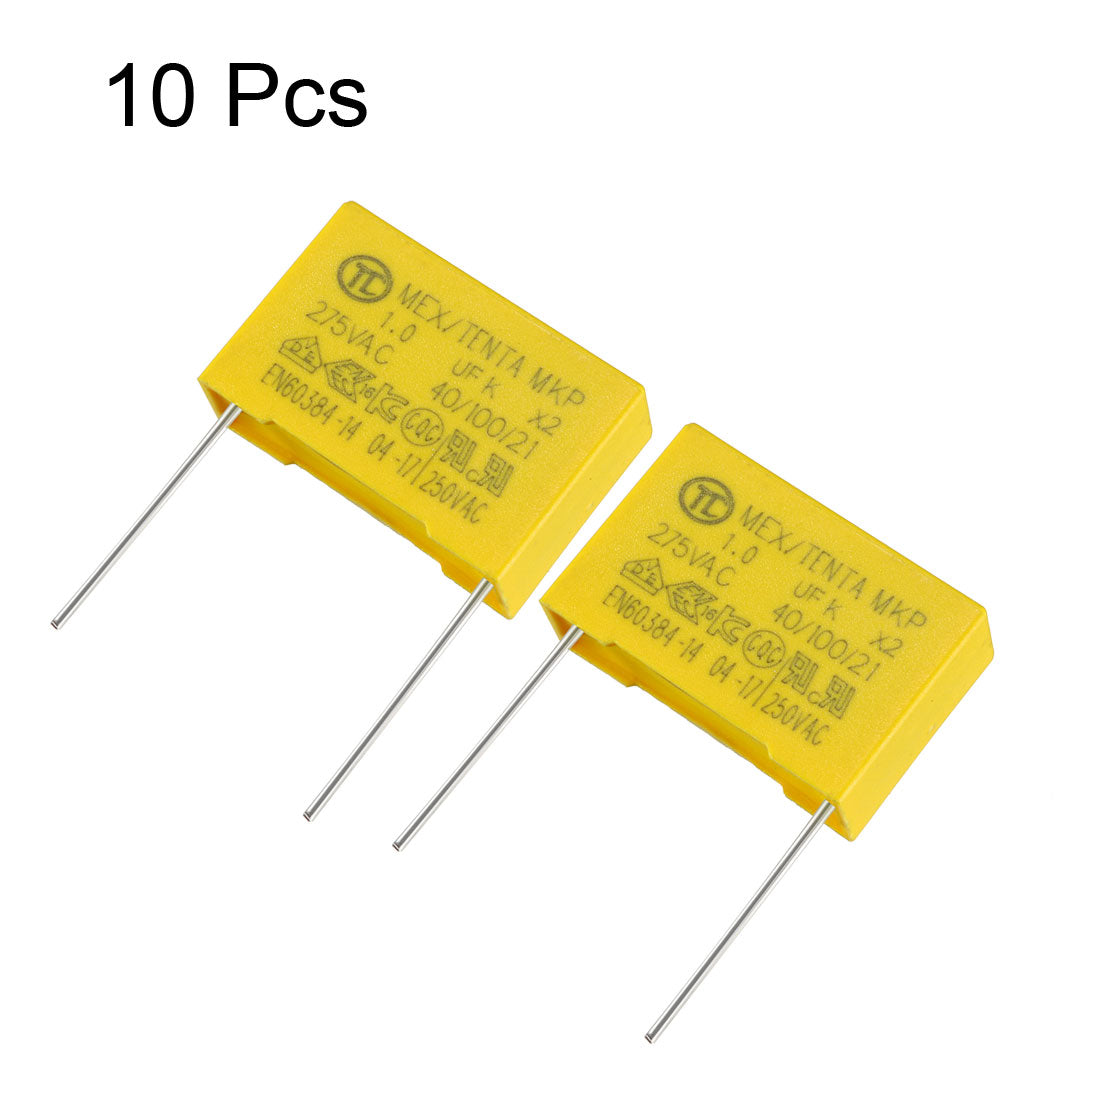 uxcell Uxcell Polypropylene Film Safety Capacitors 1uF 275VAC X2 MKP 10 Pcs